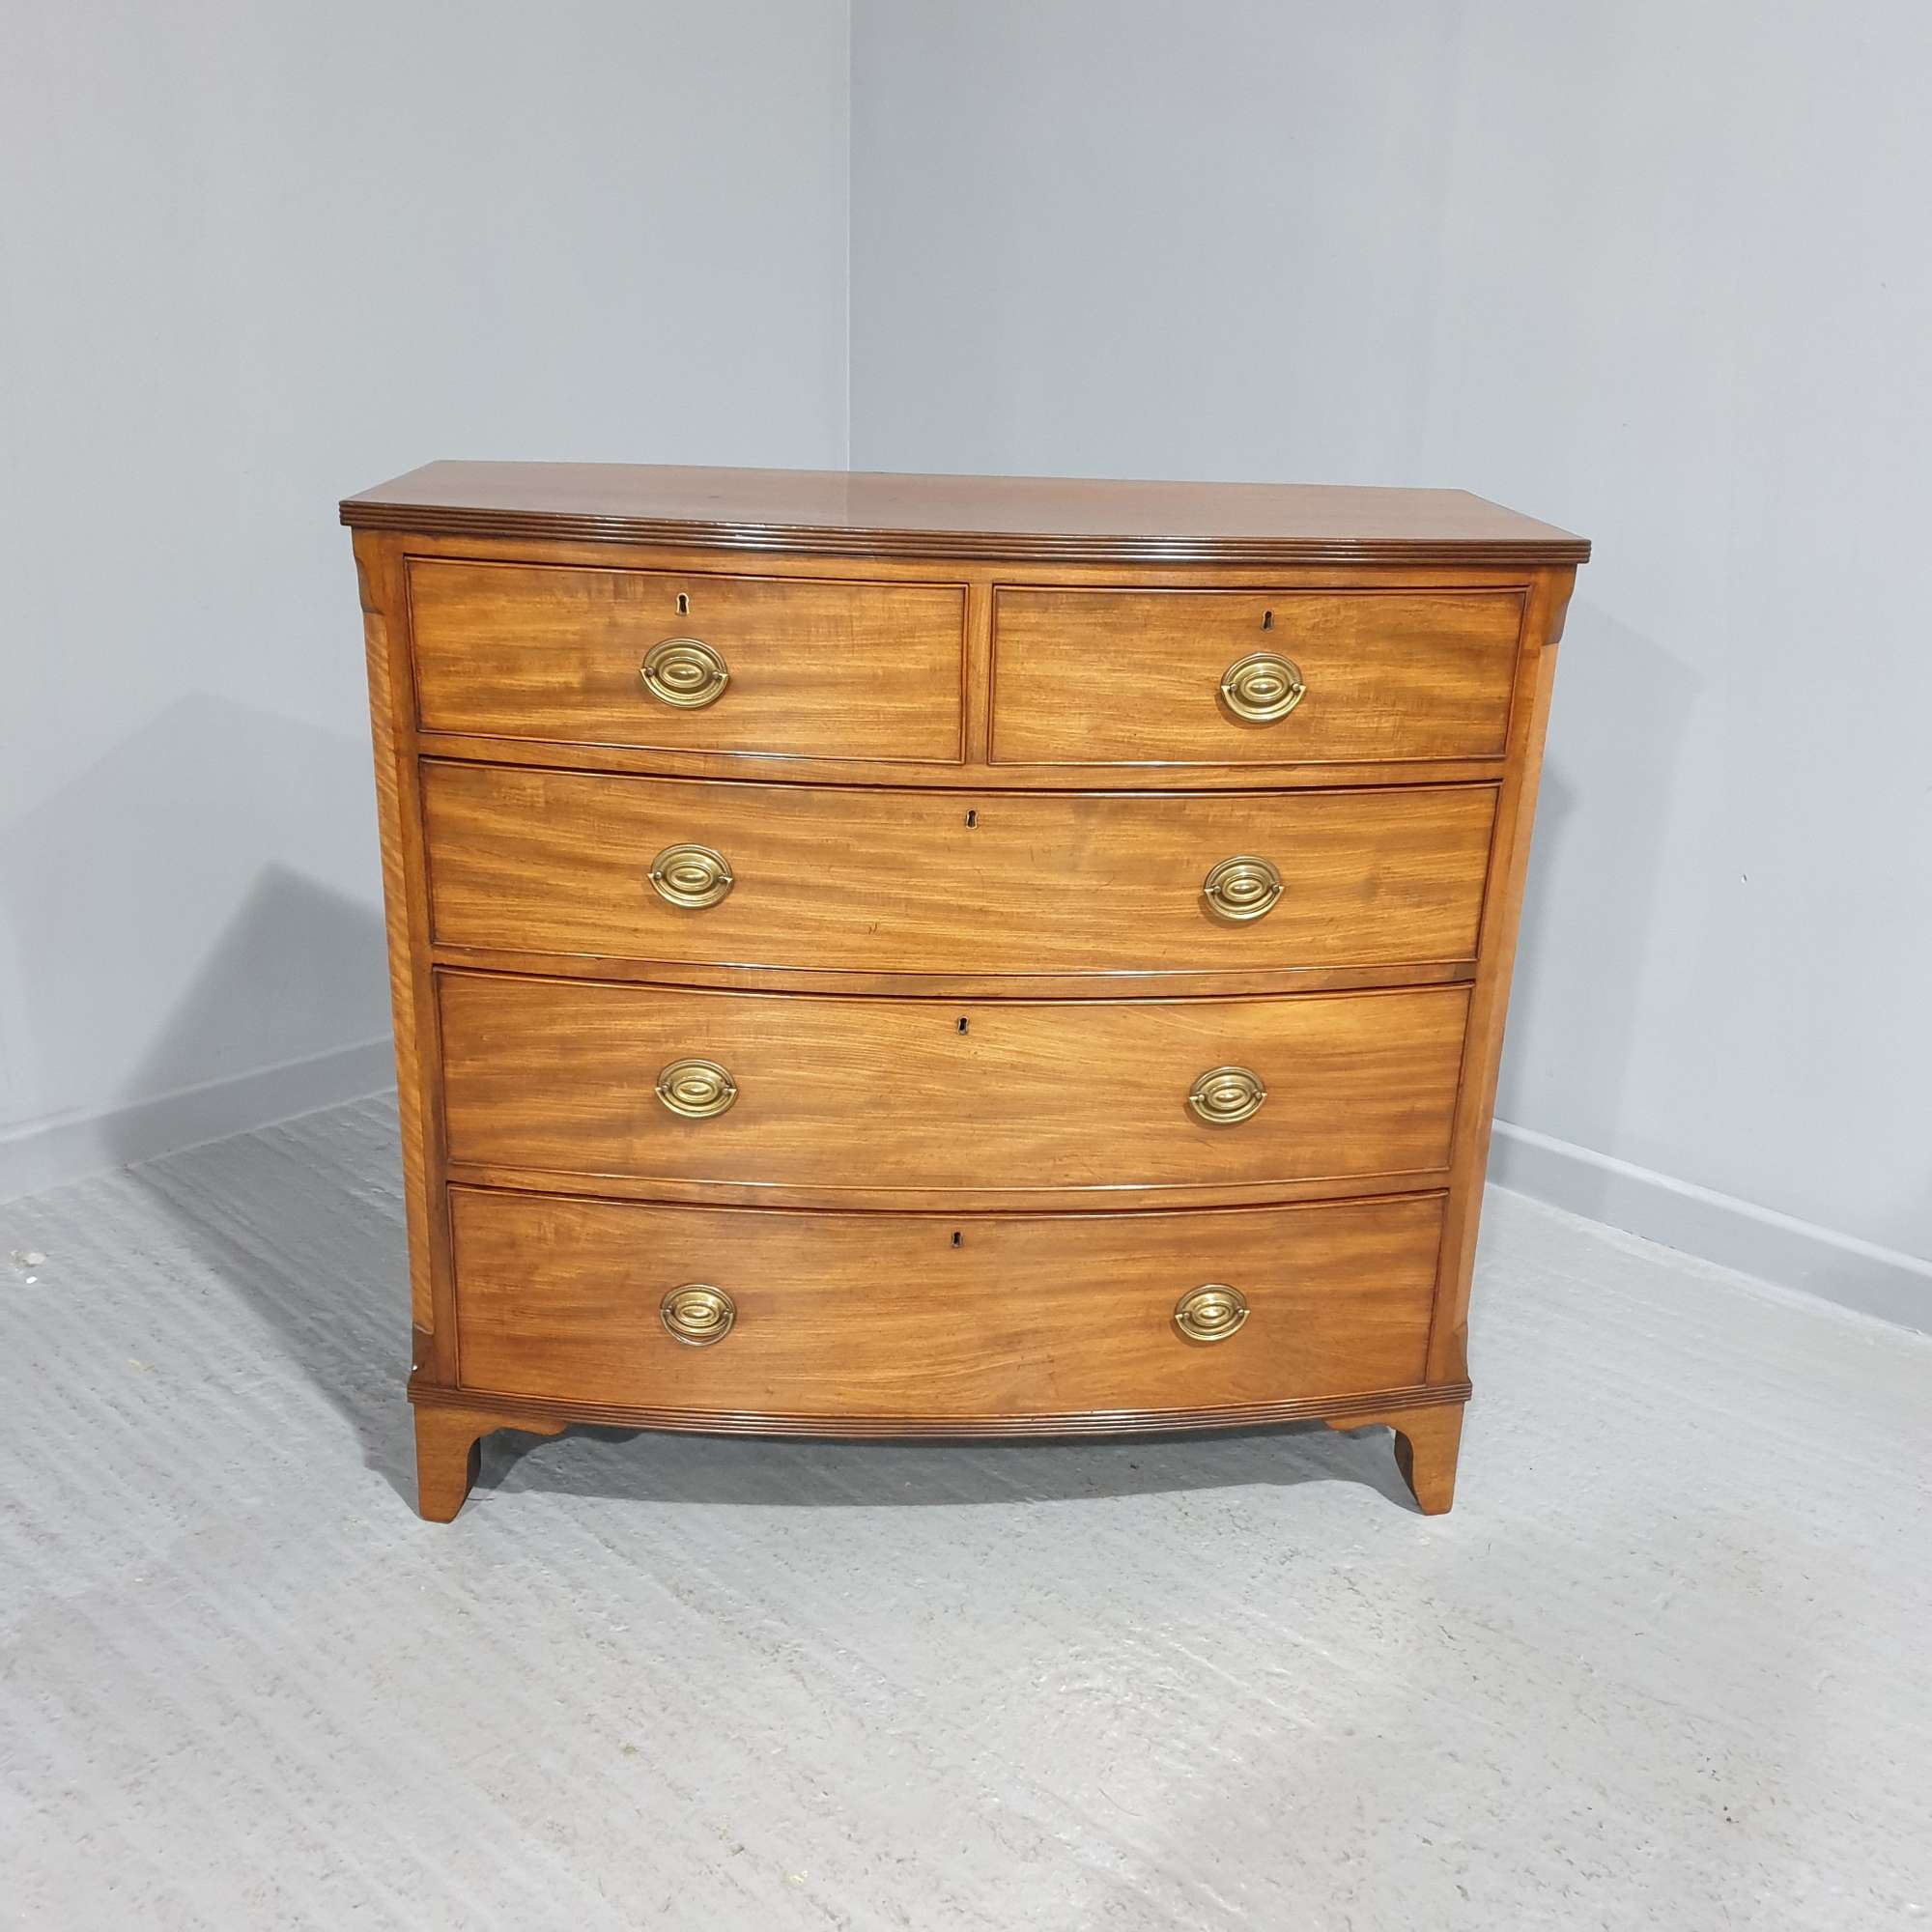 Super Quality Regency Mahogany Antique Chest Of Drawers